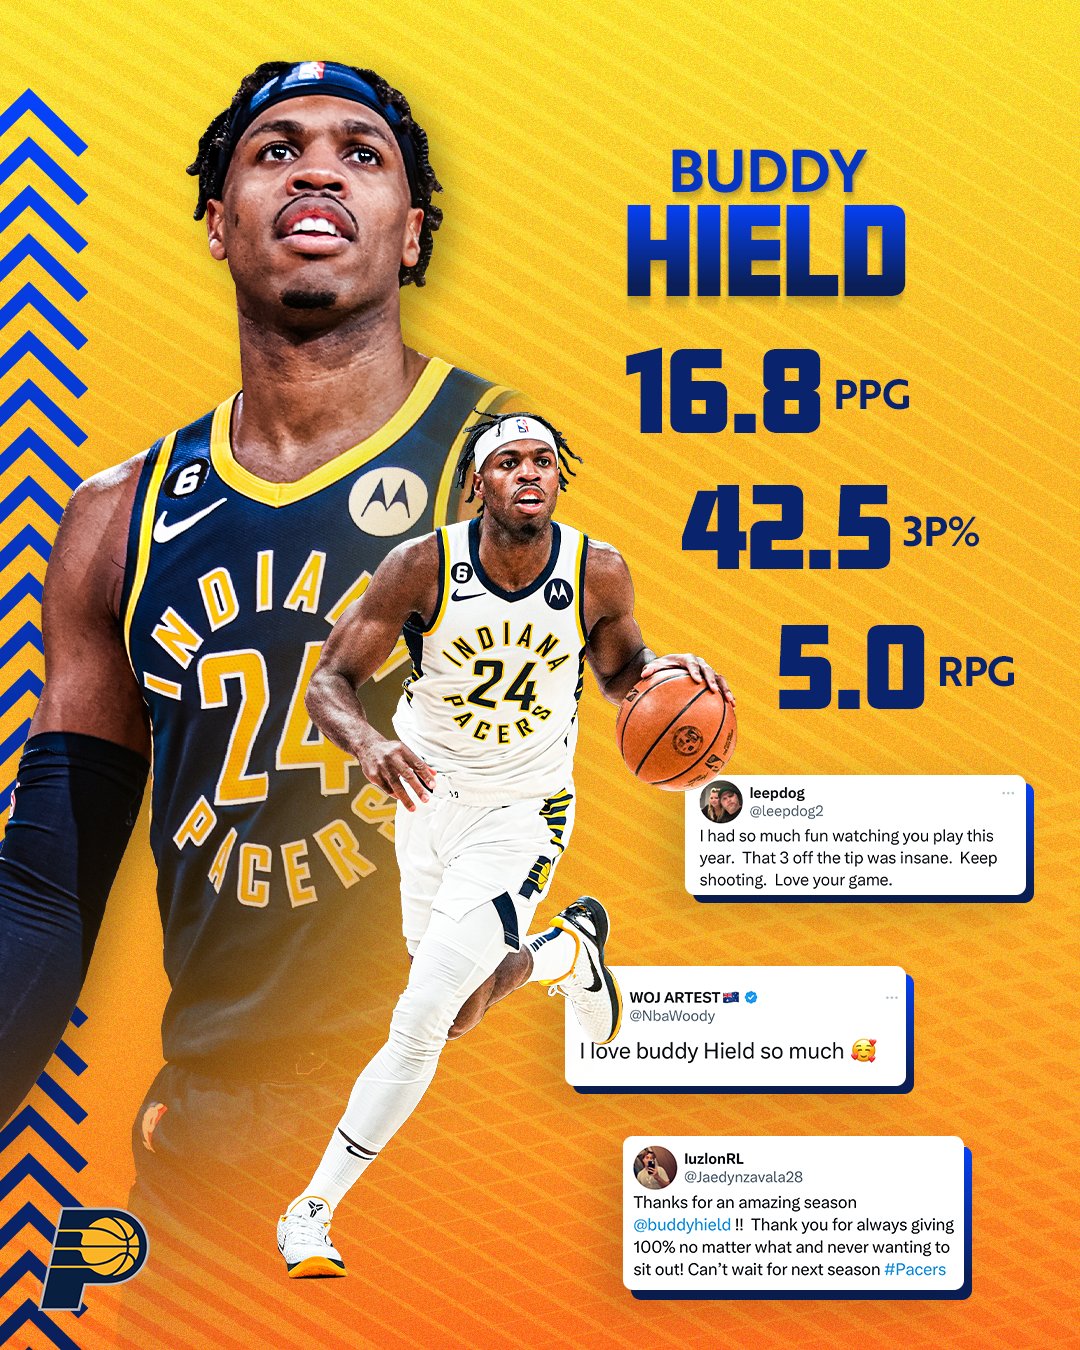 PacersrecaP #9.2: A glimpse into the Pacers future and eye-popping